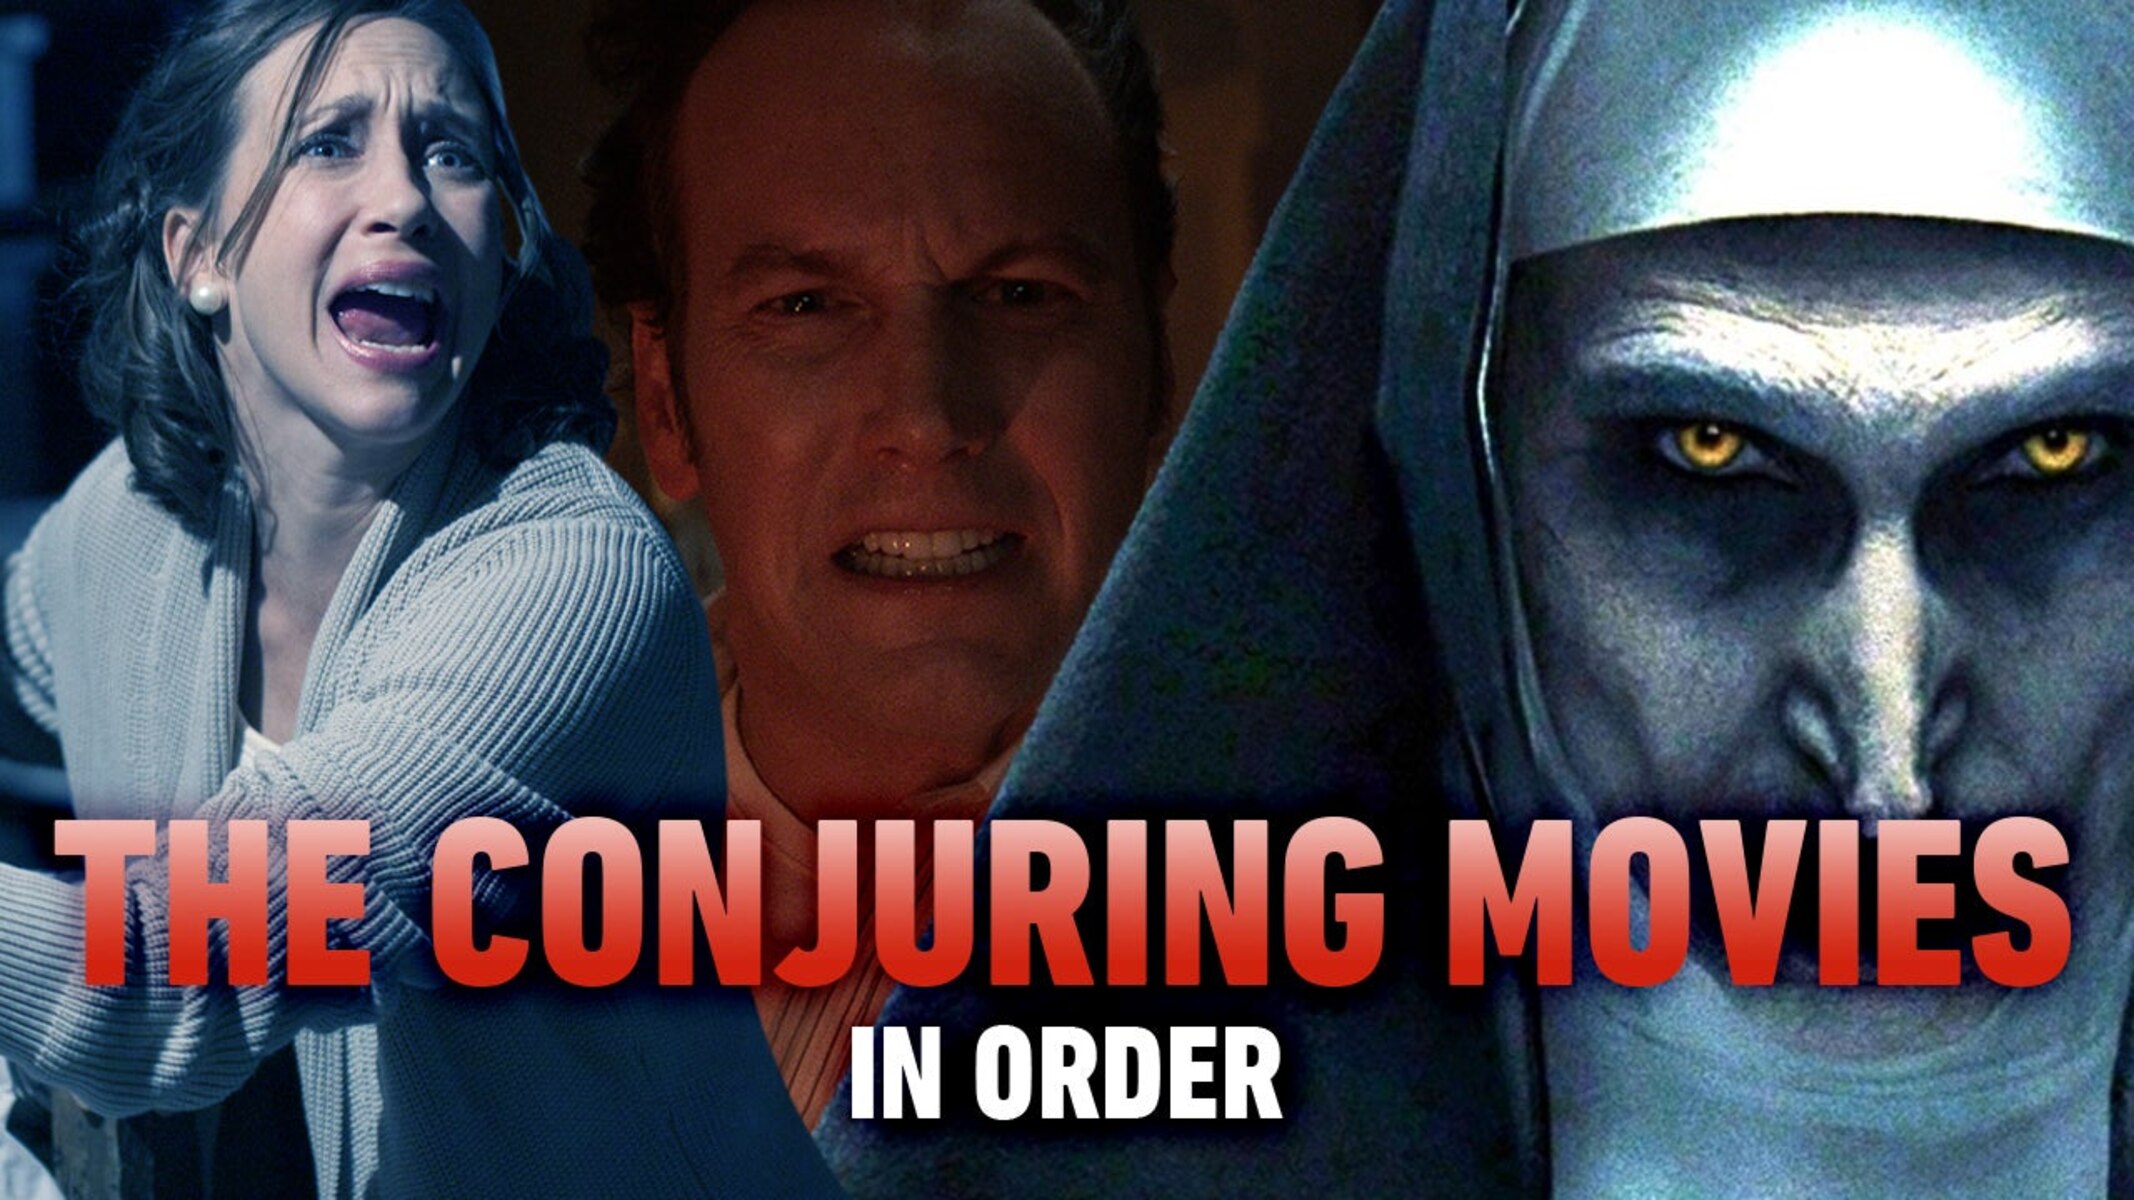 How To Watch The Conjuring Movies In Order